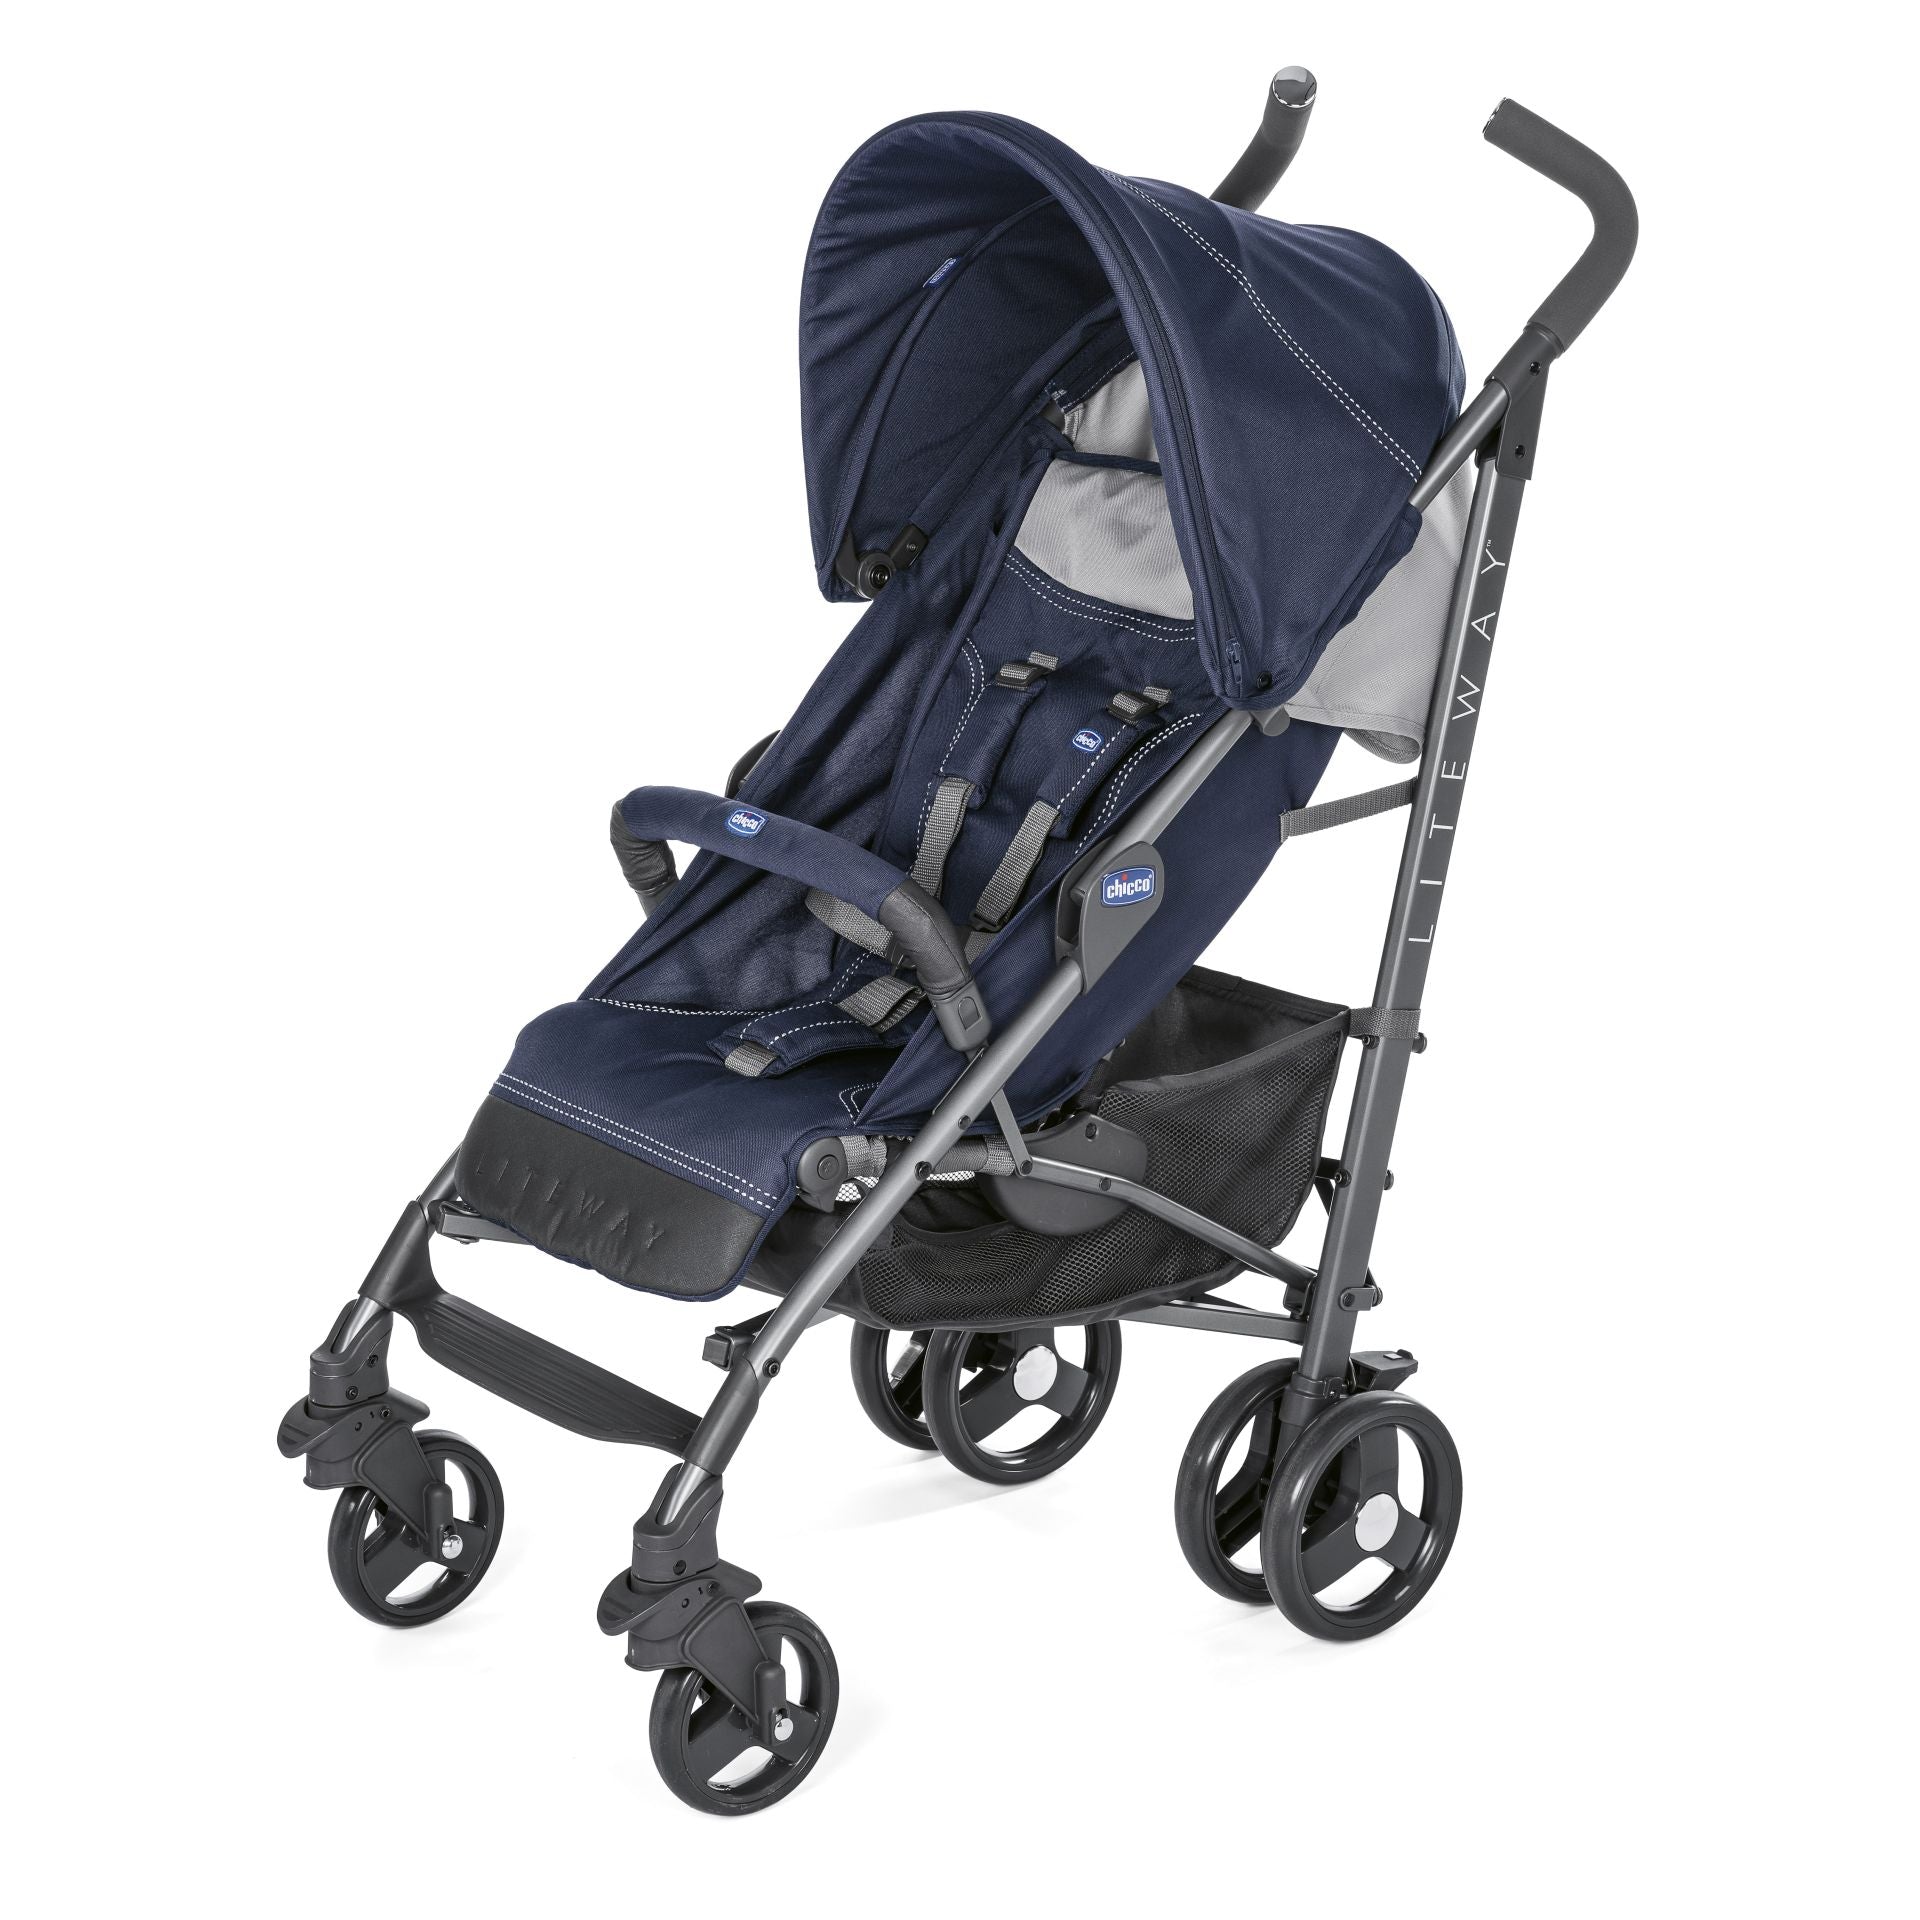 Chicco lite way. Прогулочная коляска Chicco Lite way. Chicco Lite way 3. Коляска Чикко трость Lite way. Chicco Lite way 3 Top.